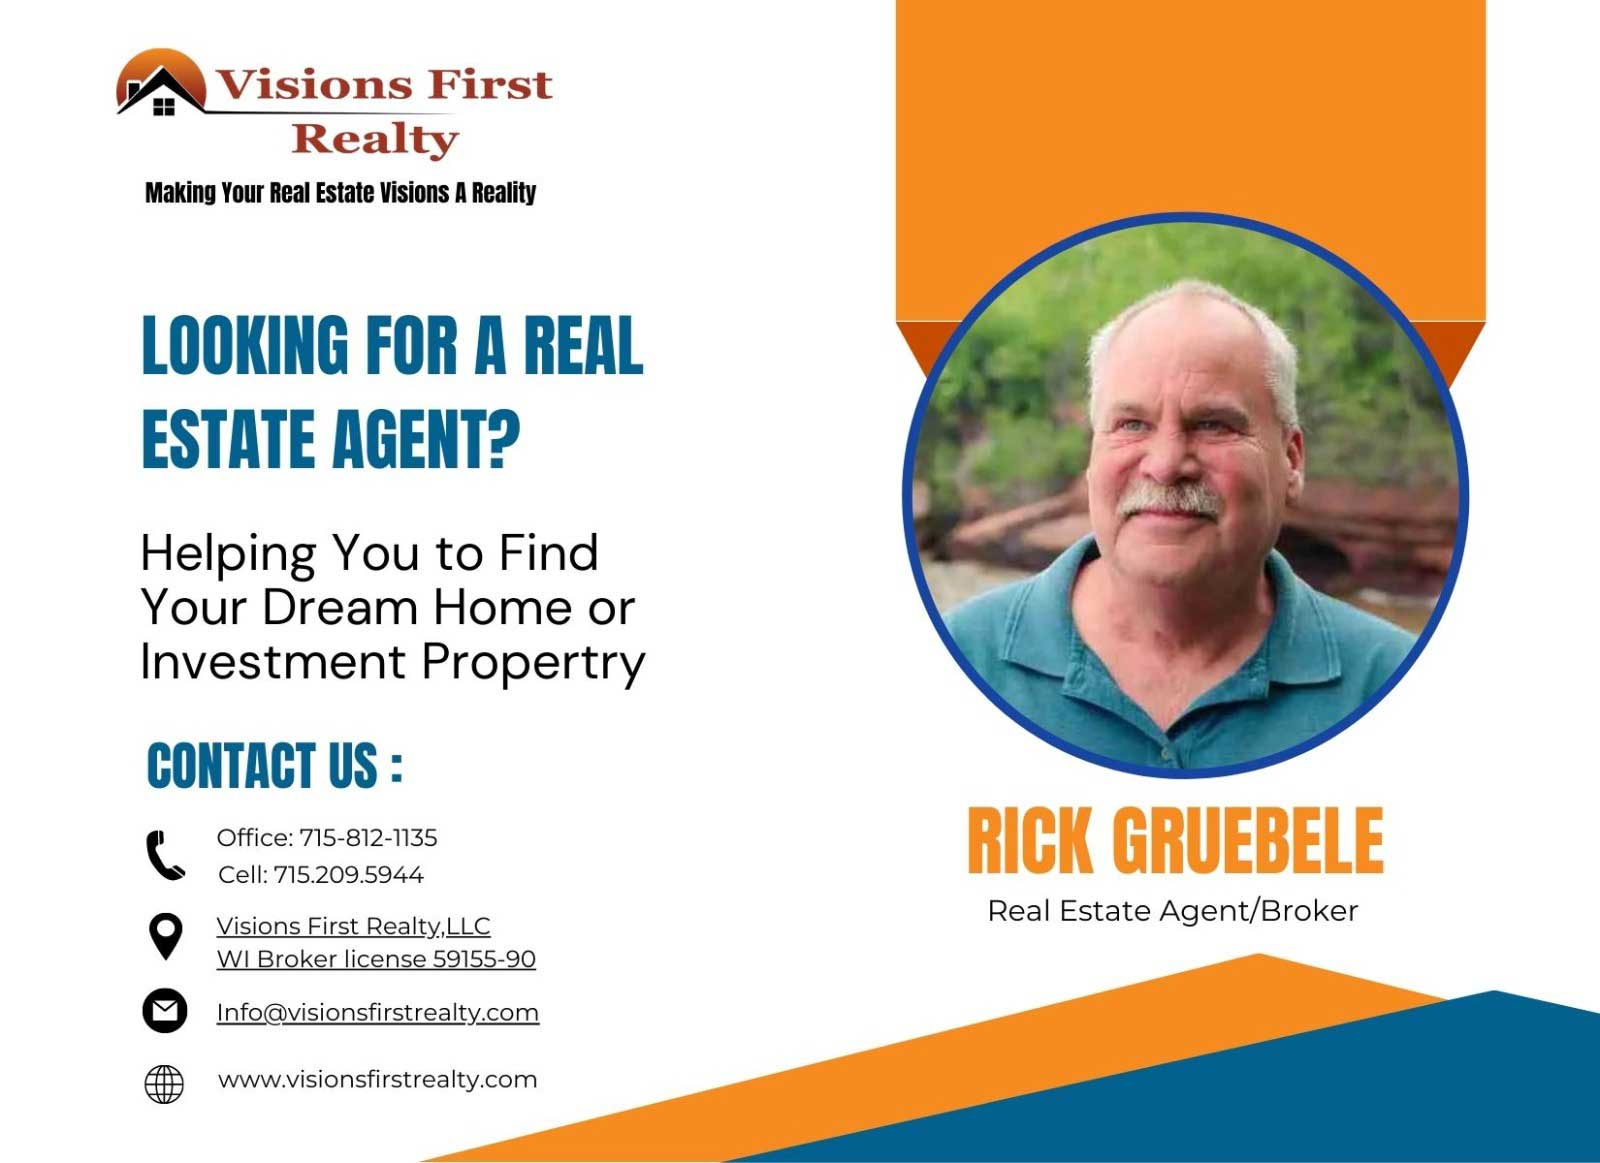 Visions First Realty